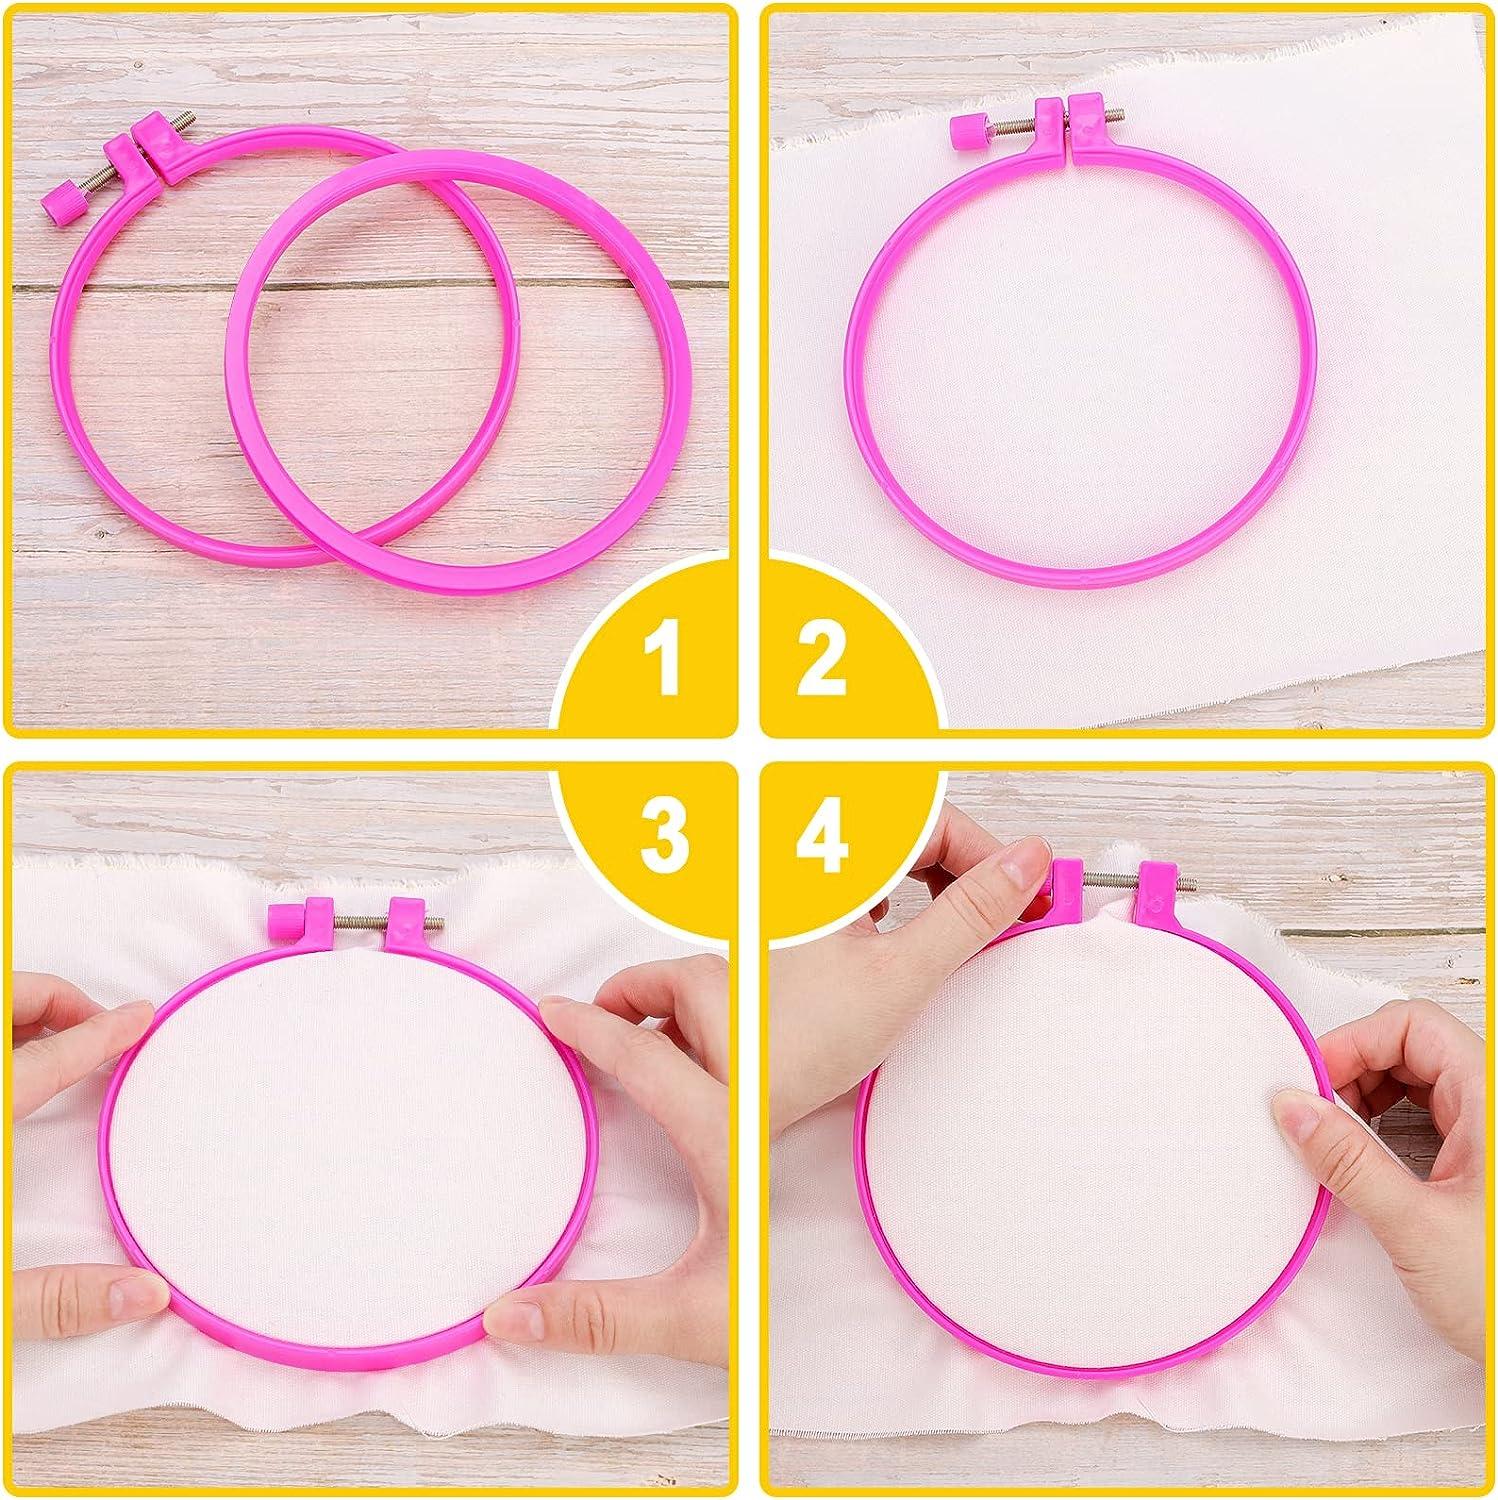 Better Crafts 8 Inch Embroidery Hoop Wooden Circle Cross Stitch Hoop for  Embroidery and Art Craft Handy Sewing (3 Piece, 8-Inch)